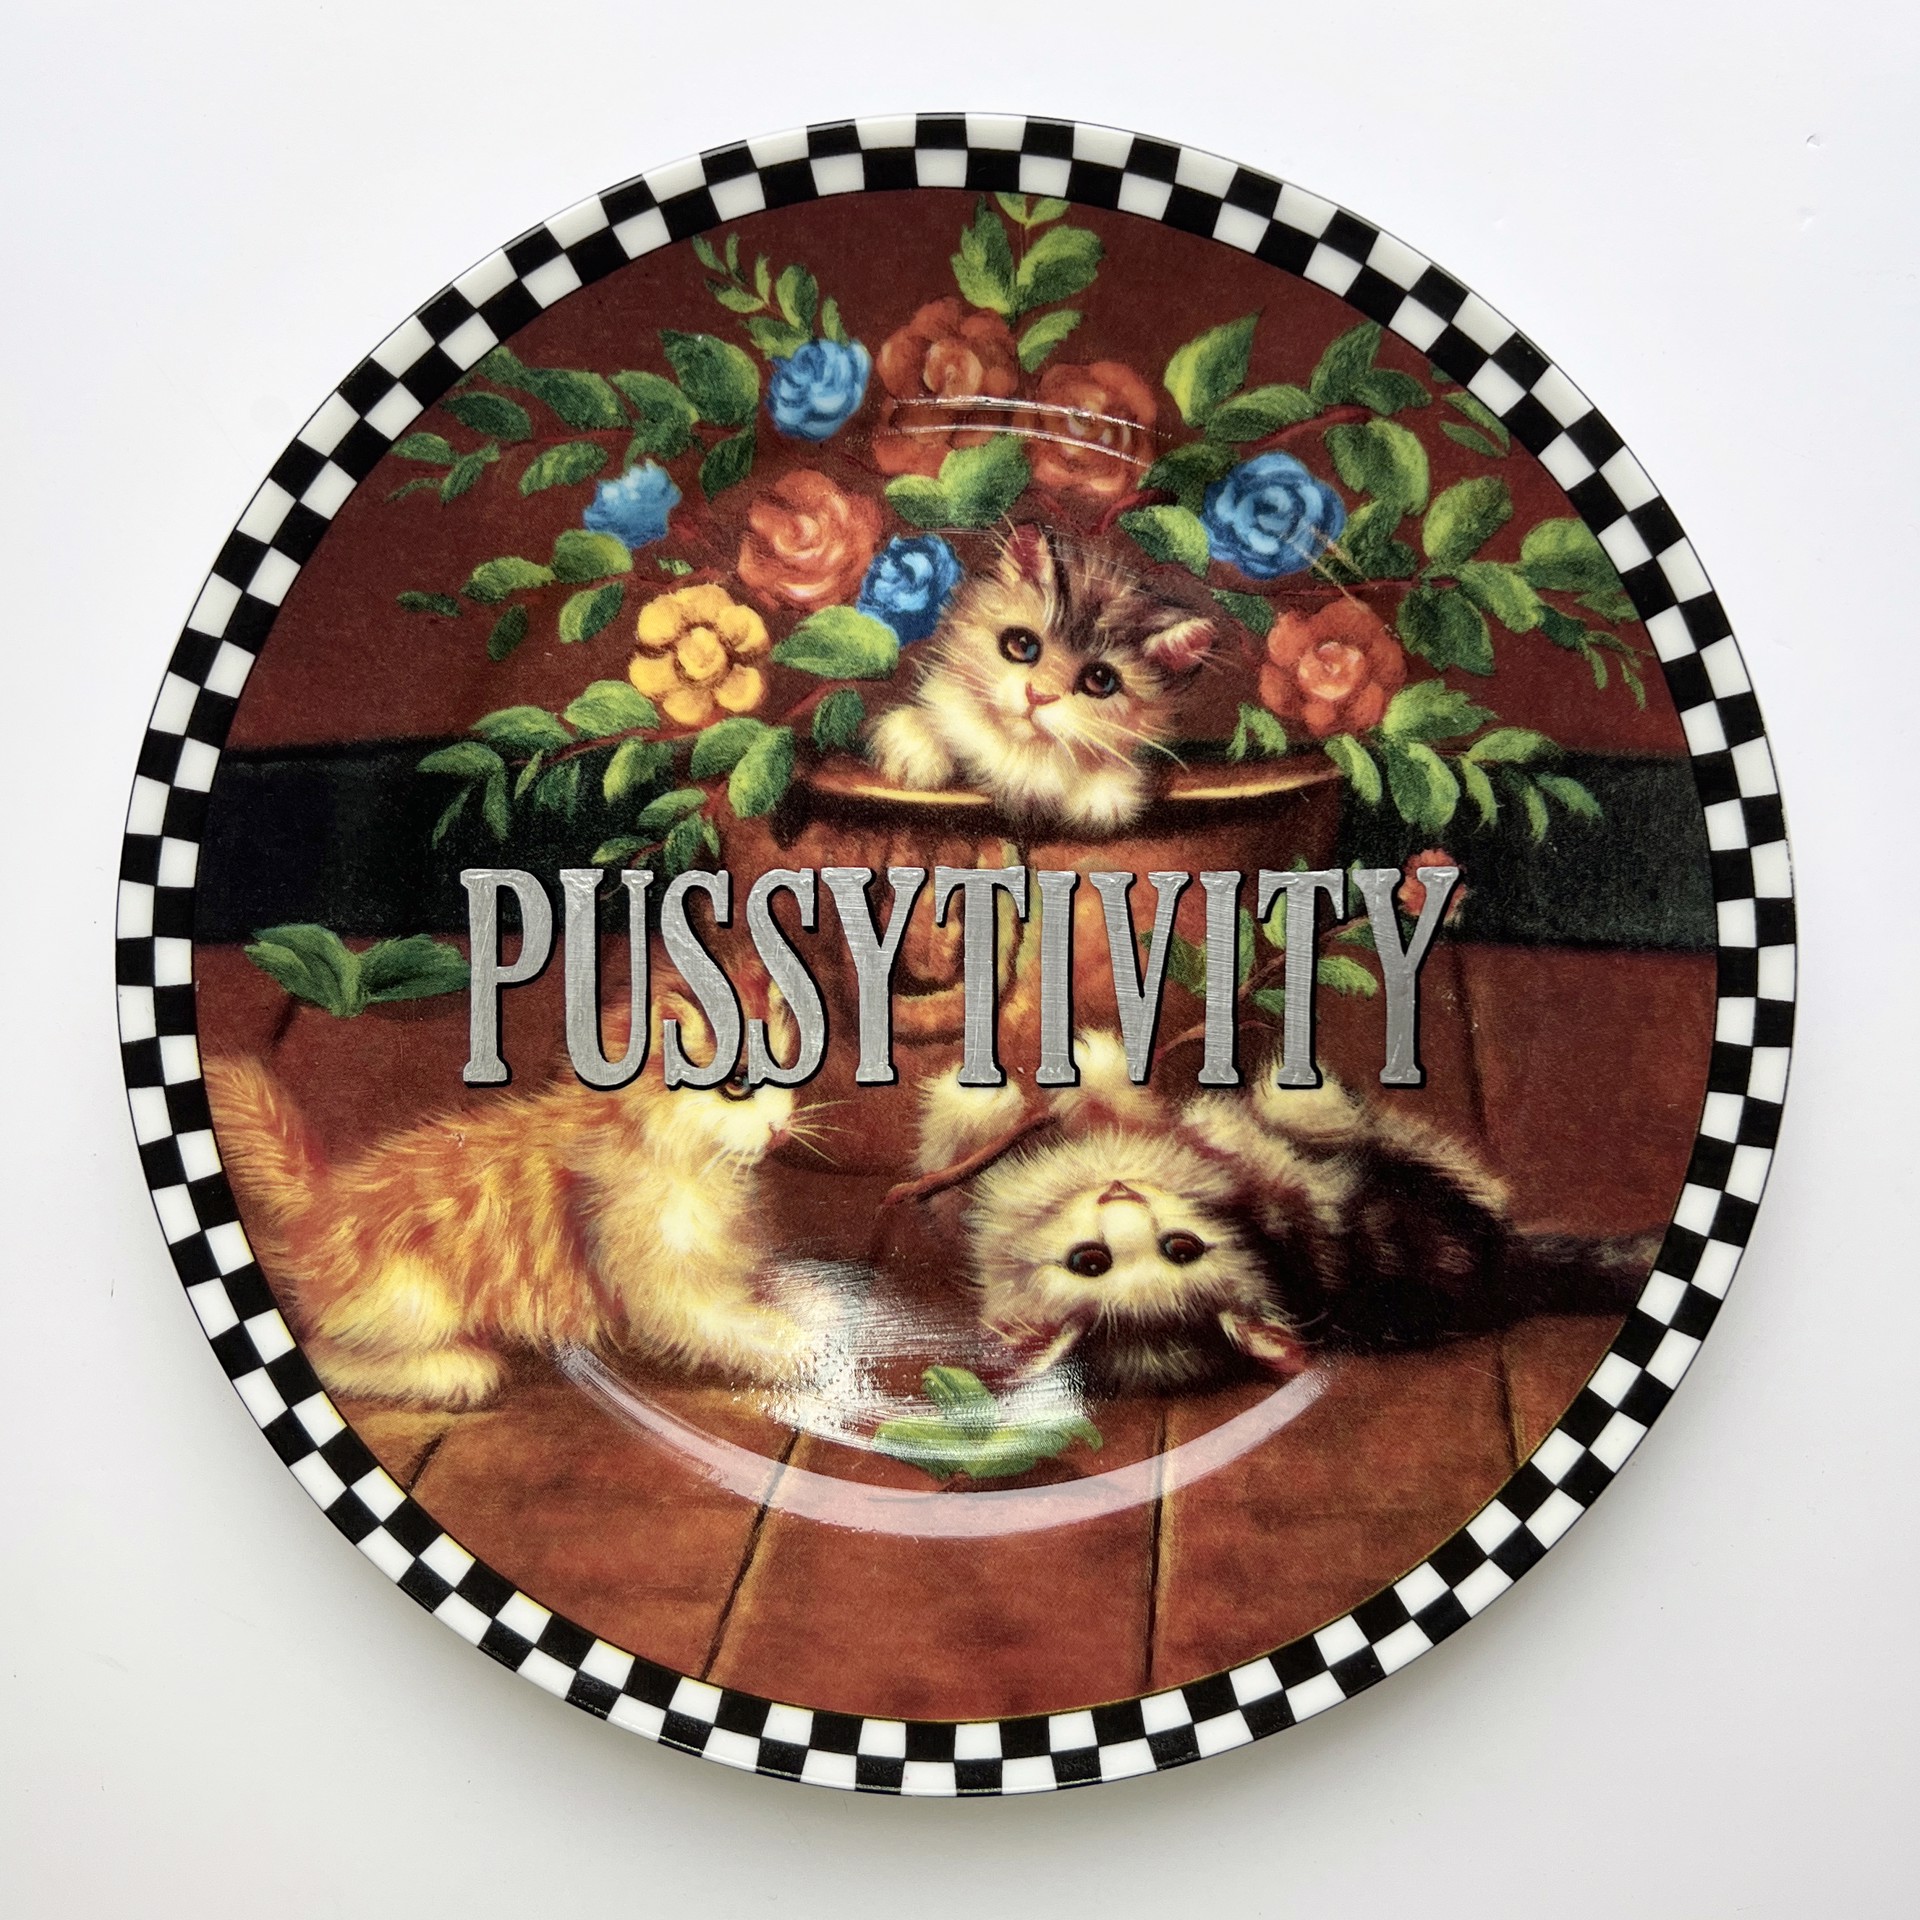 Pussitivity by Marie-Claude Marquis